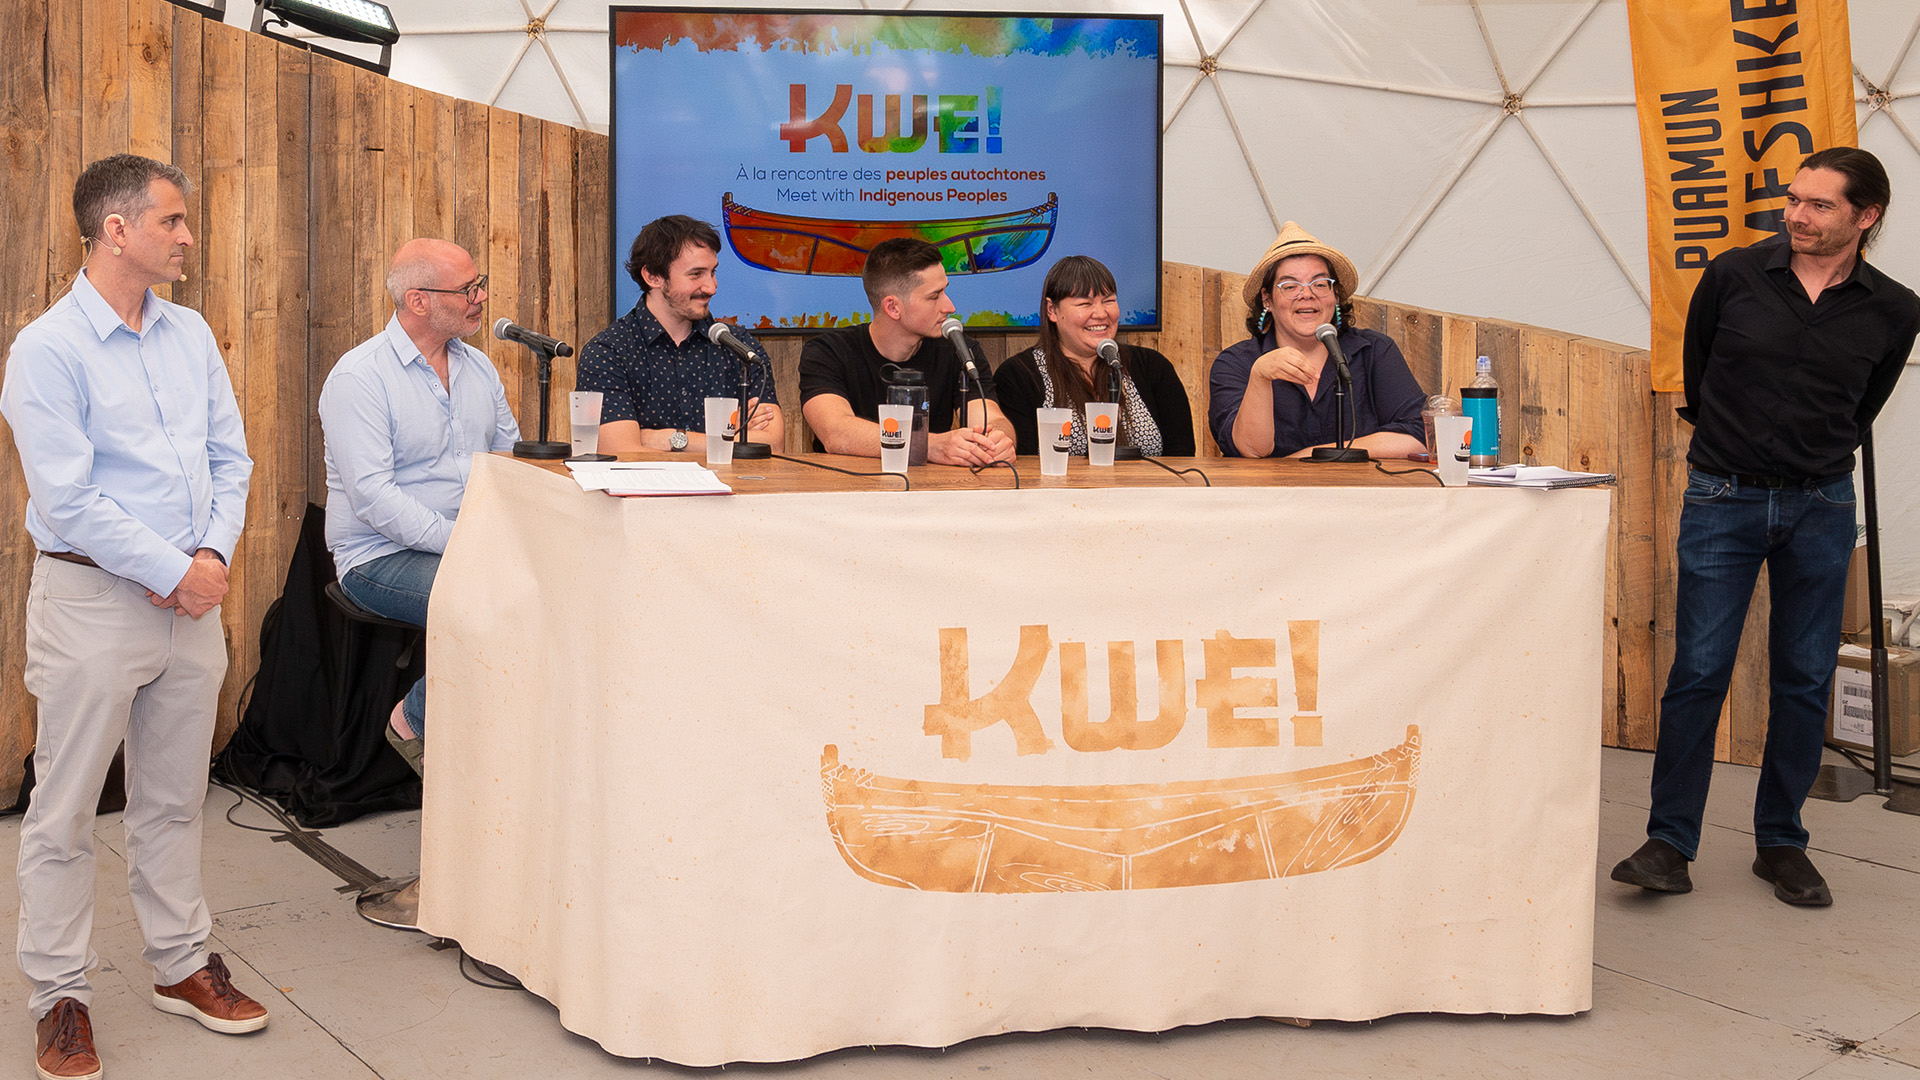 Alex Boissonneault and Alexandre Bacon standing,Jérôme Gill-Couture, Samuel Lapointe-Savard, Melissa Mollen Dupuis,Nahka Bertrand, Mathieu Carli seated at a table covered with a light coloured table cloth with the KWEI letters in gold